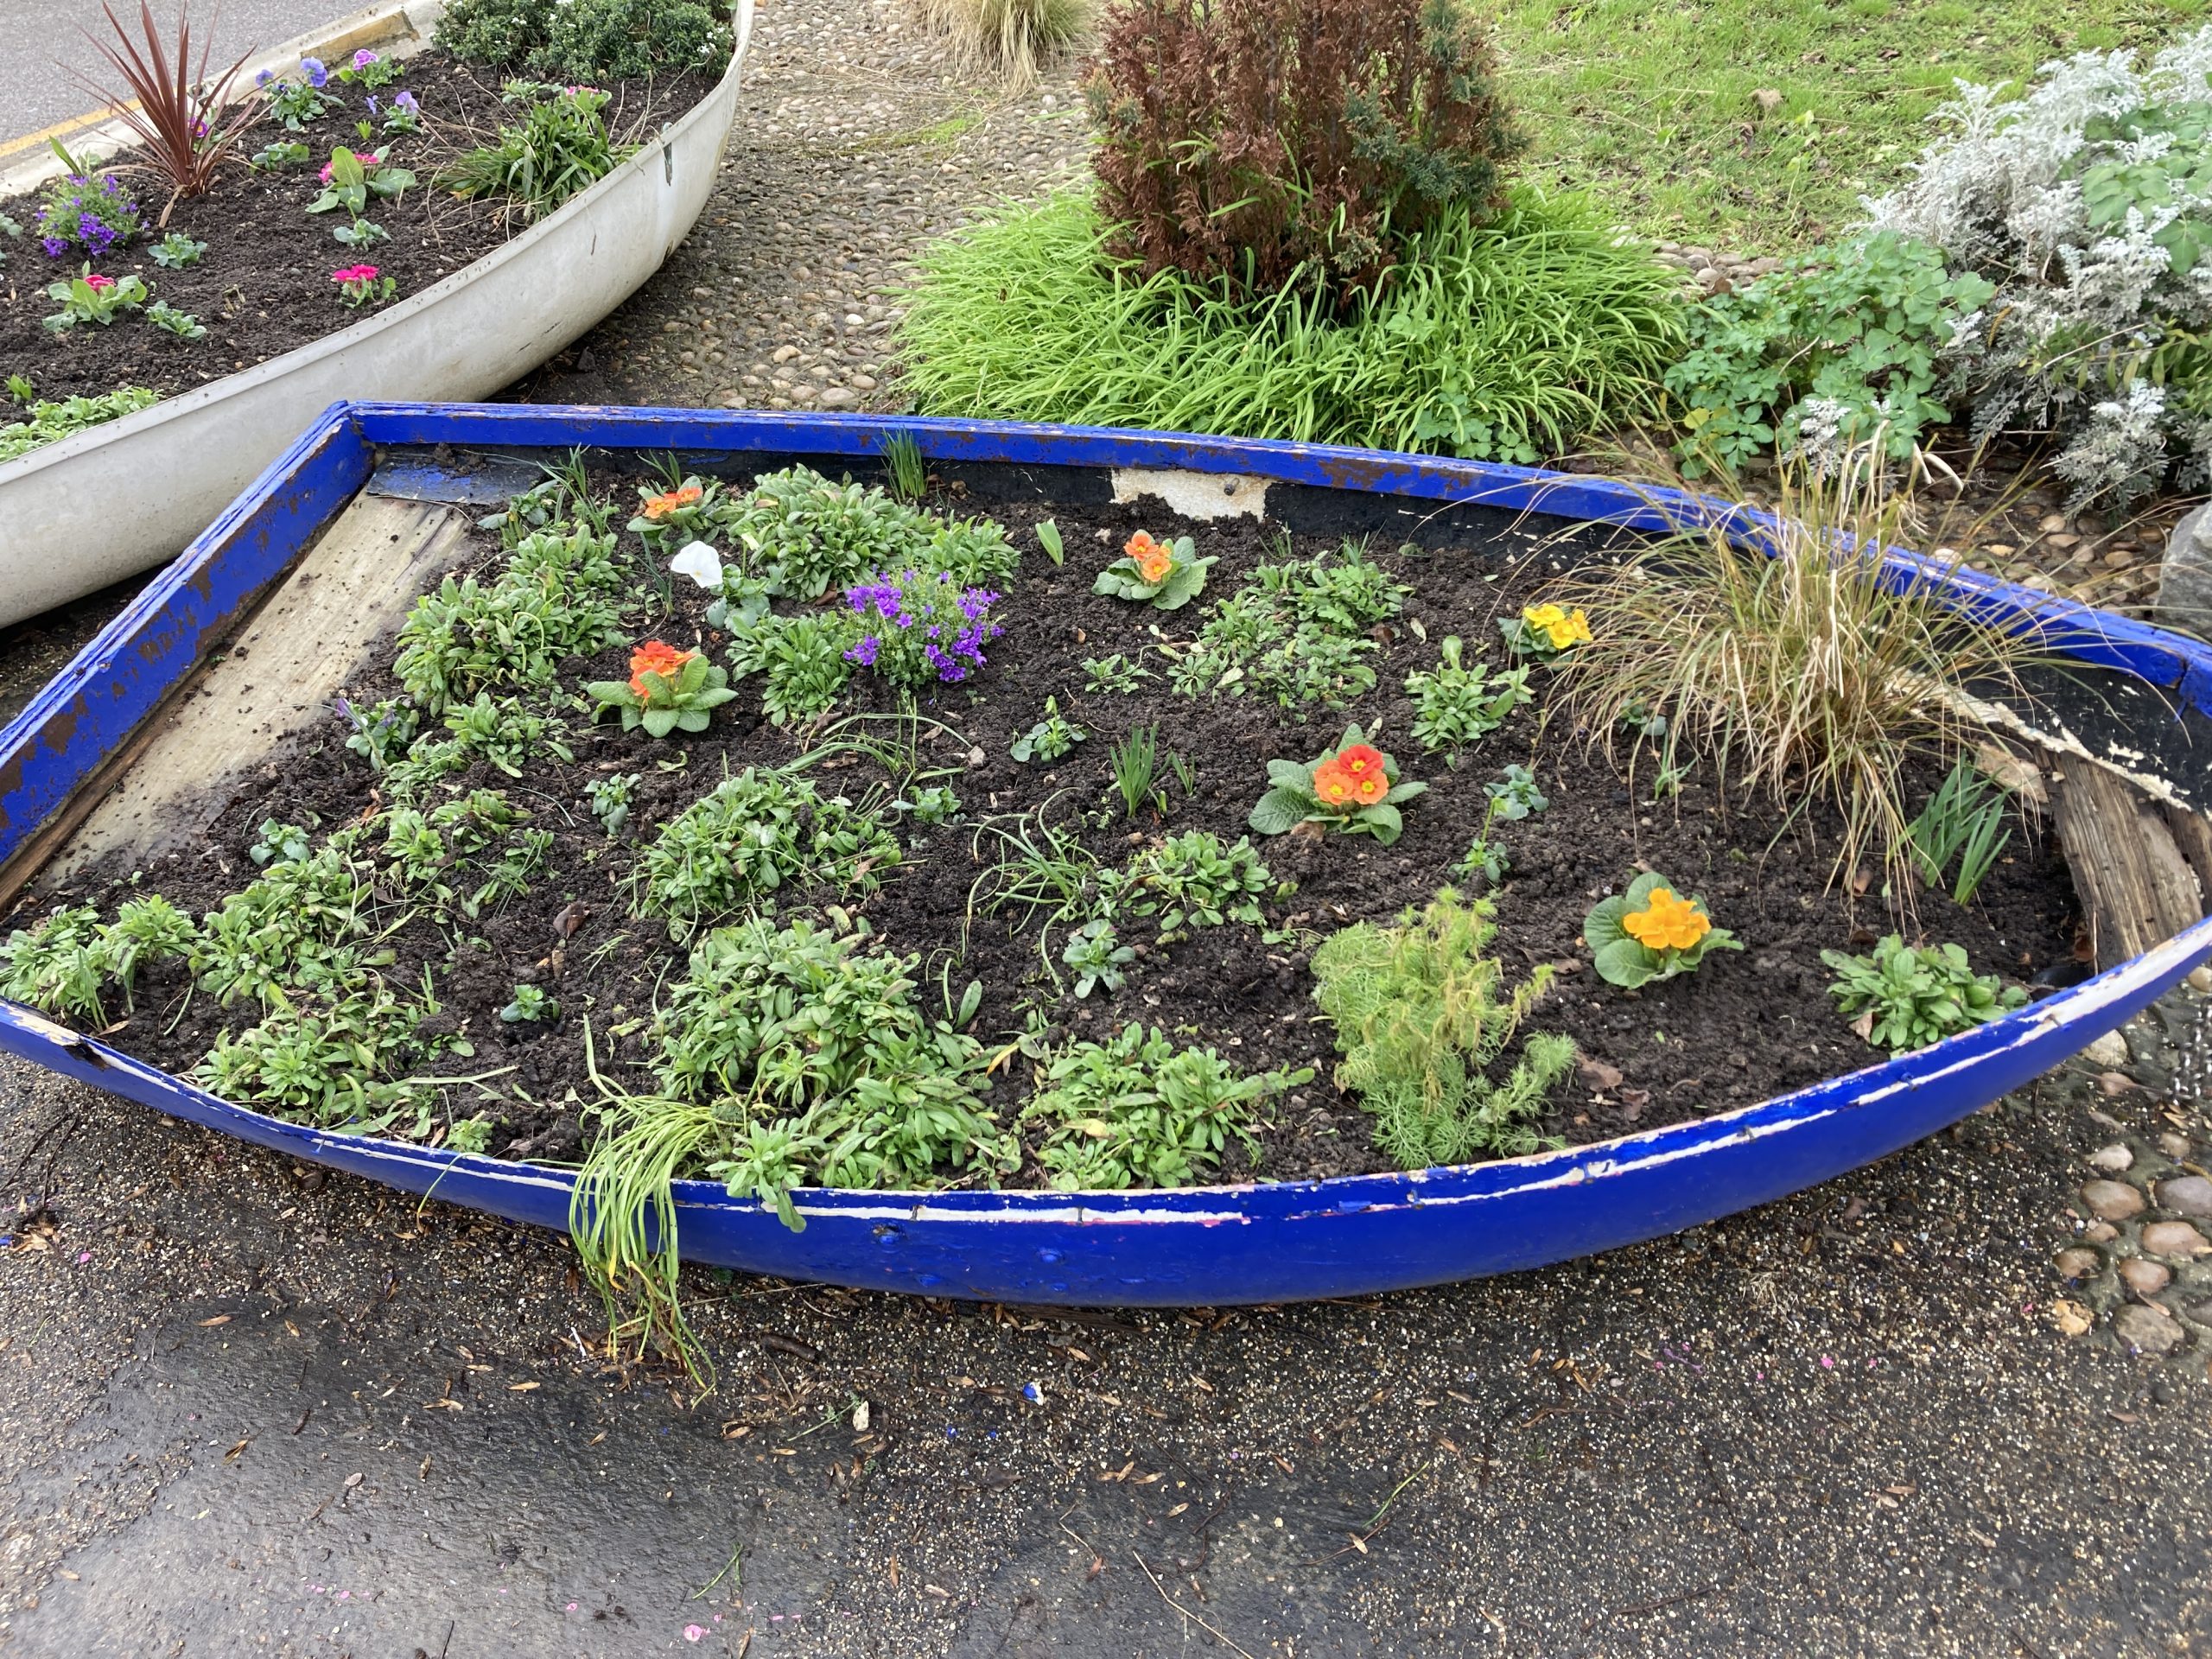 A small rowing boat that has been transformed into a flower bed, with freshly planted flowers in bloom